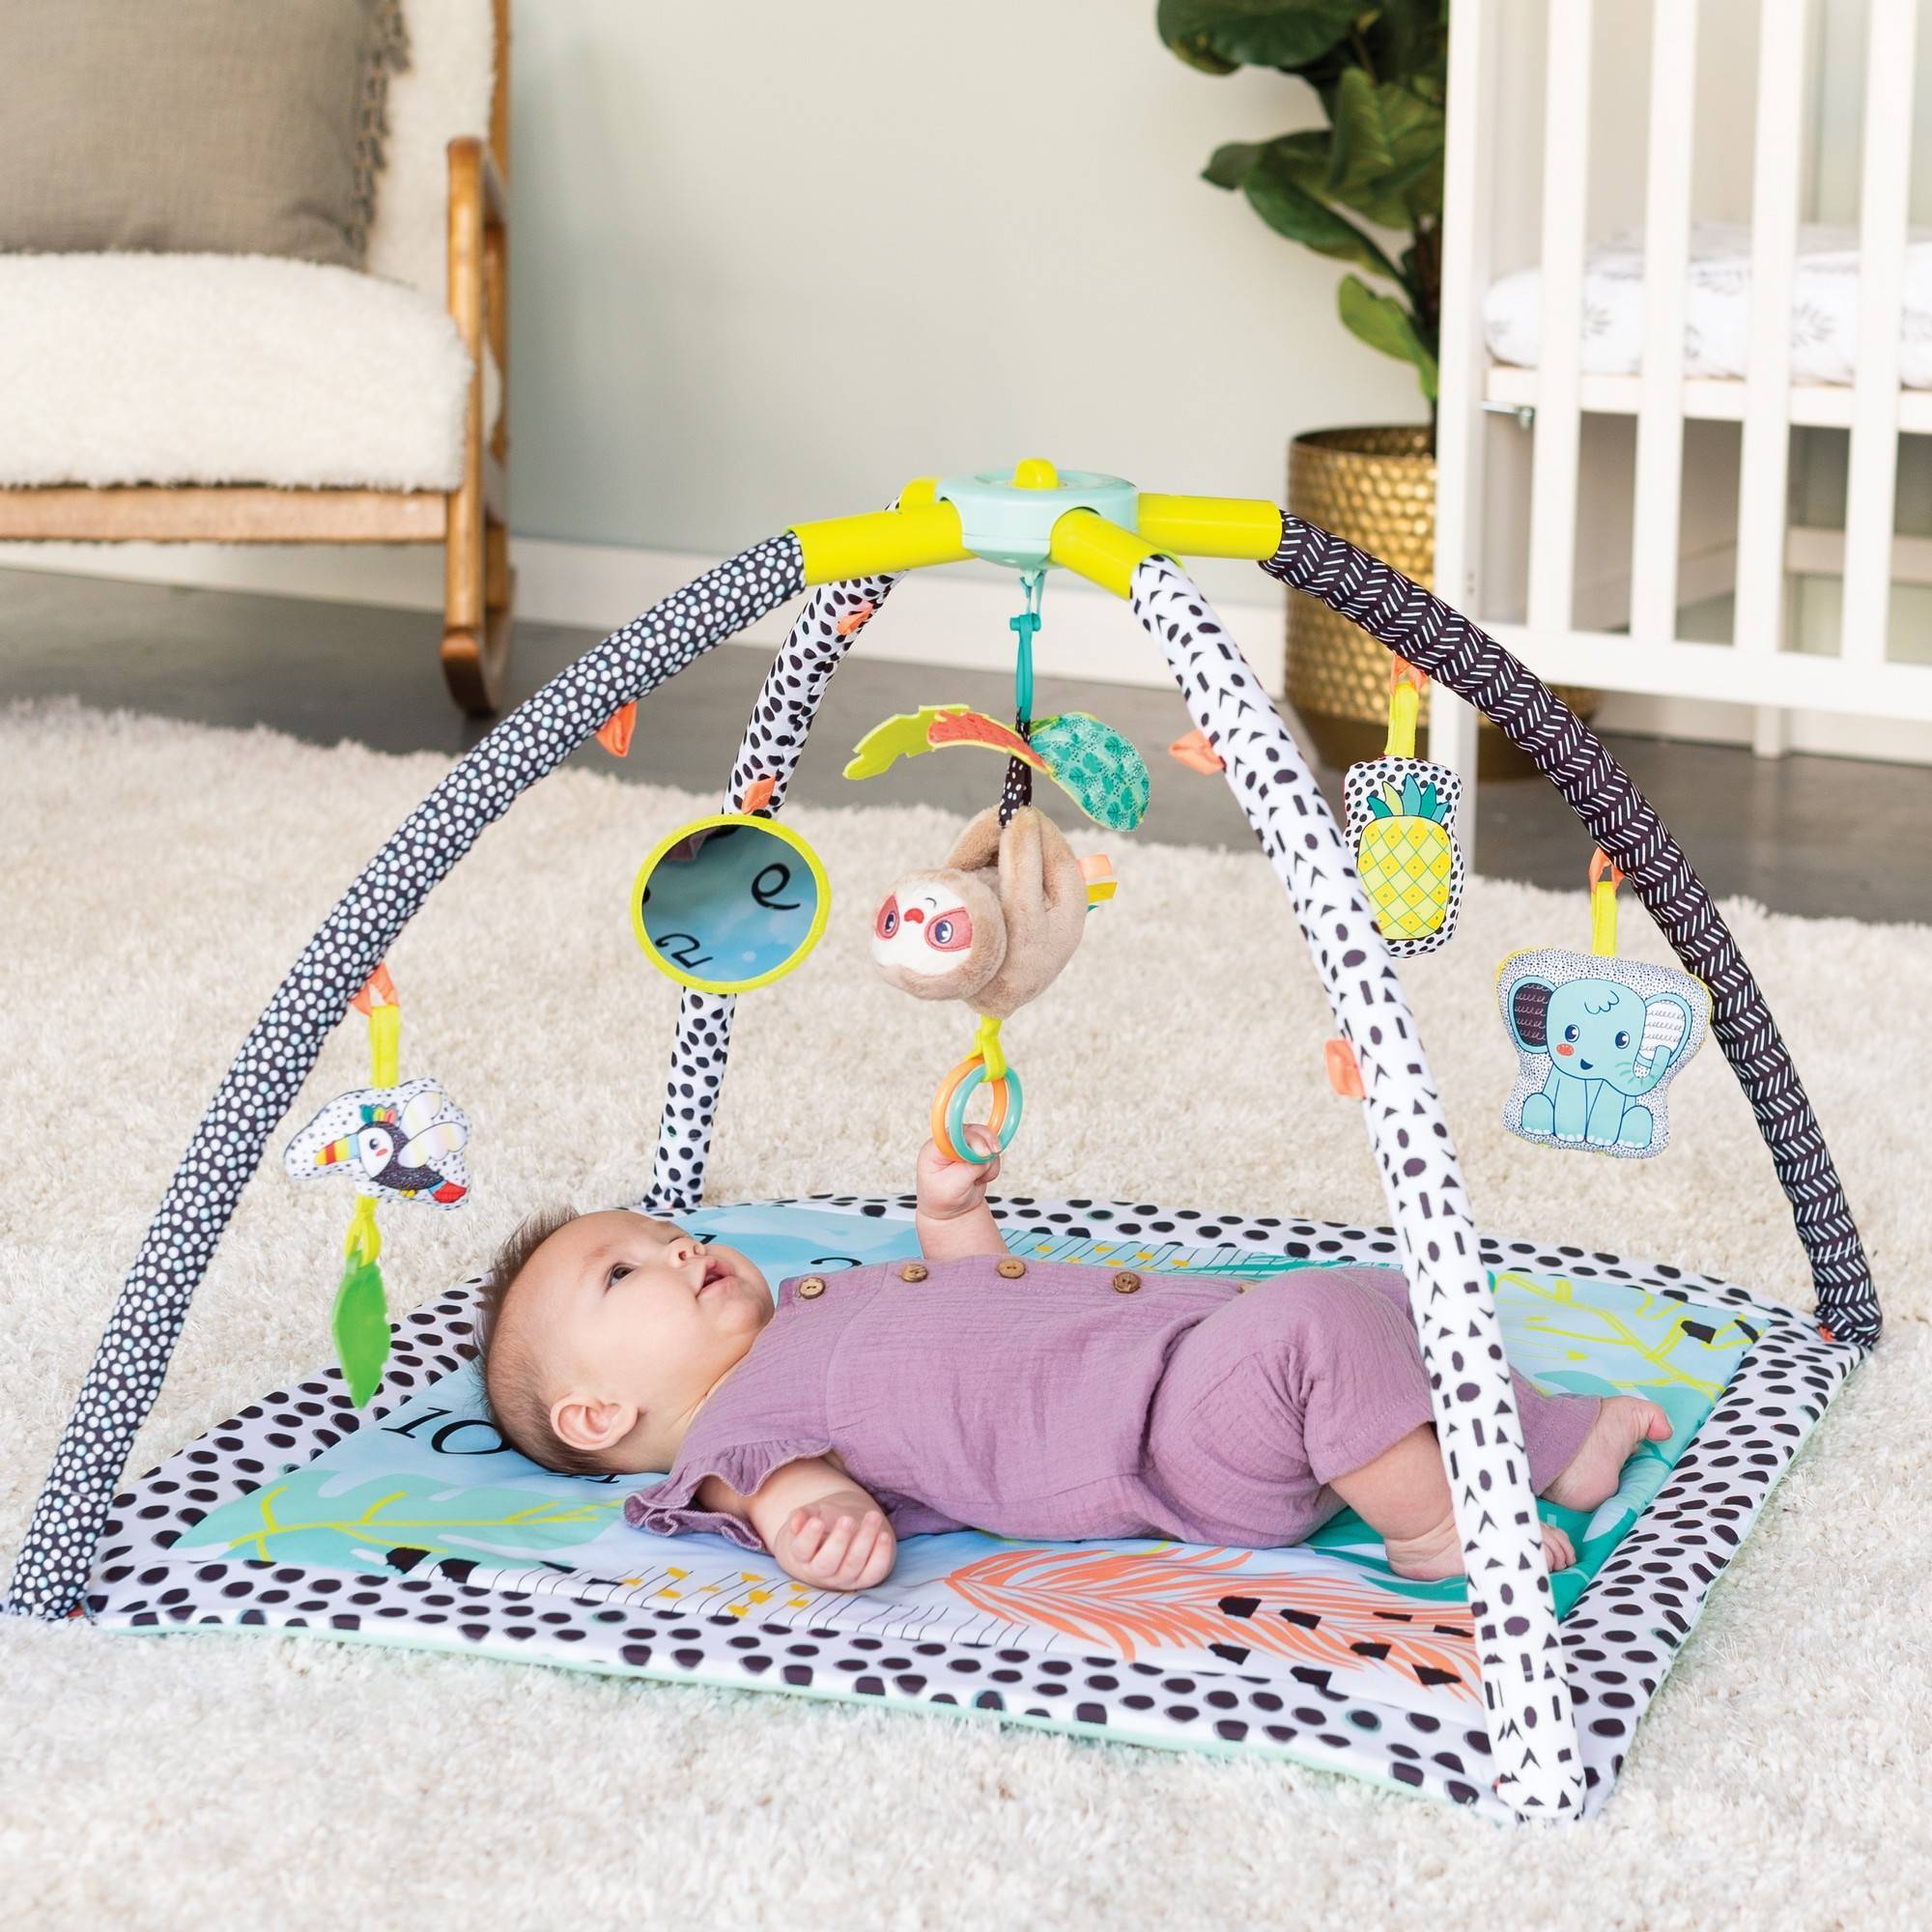 Infantino Twist & Fold Activity Gym Is Ideal for Travel and Small Spaces